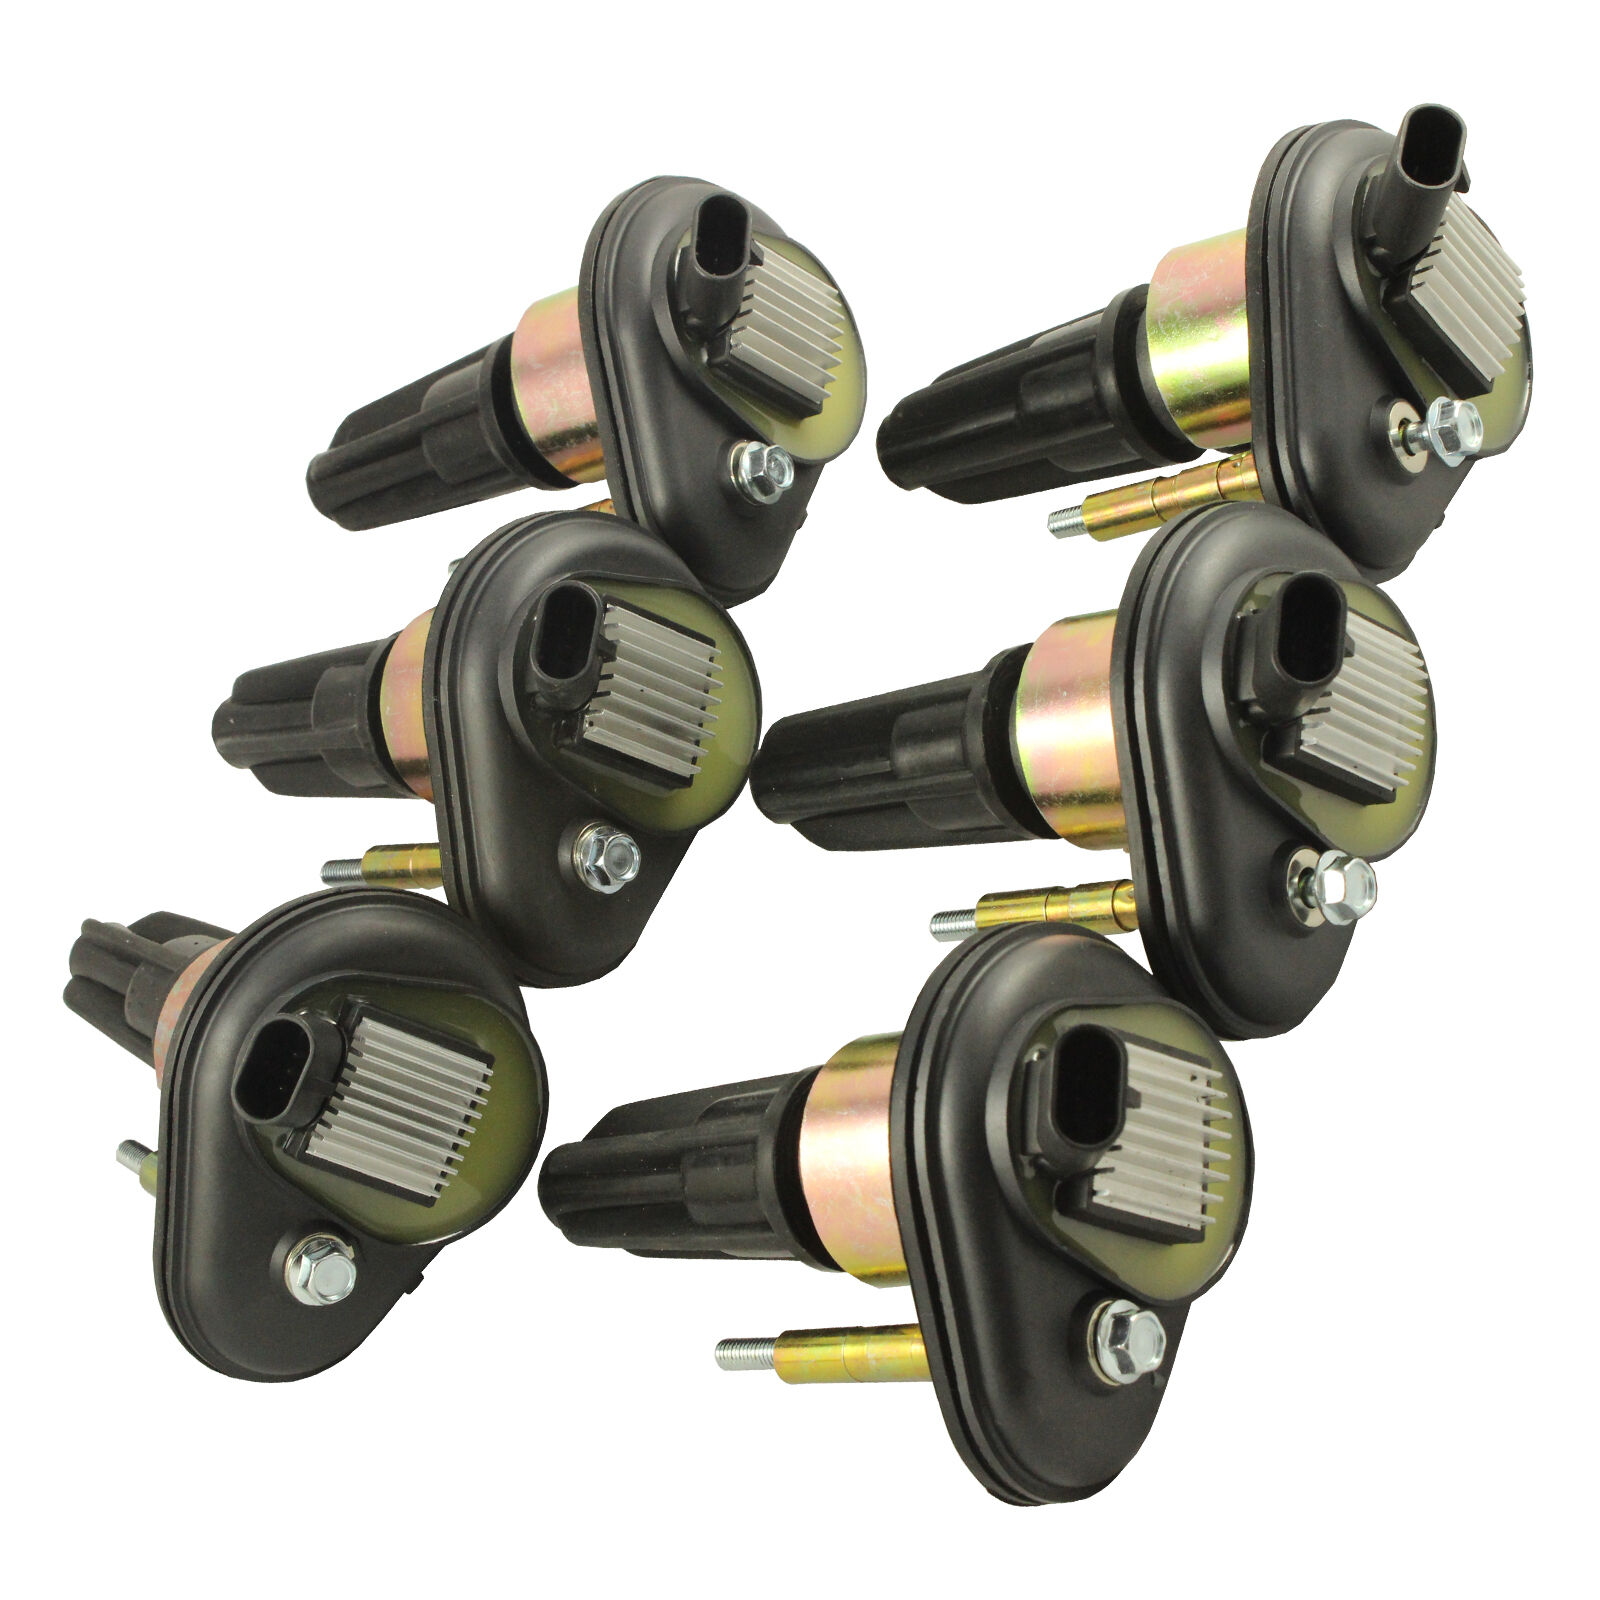 Ignition Coil Set of 6 For Chevy Trailblazer GMC Canyon Envoy 2002-2005 H3 New